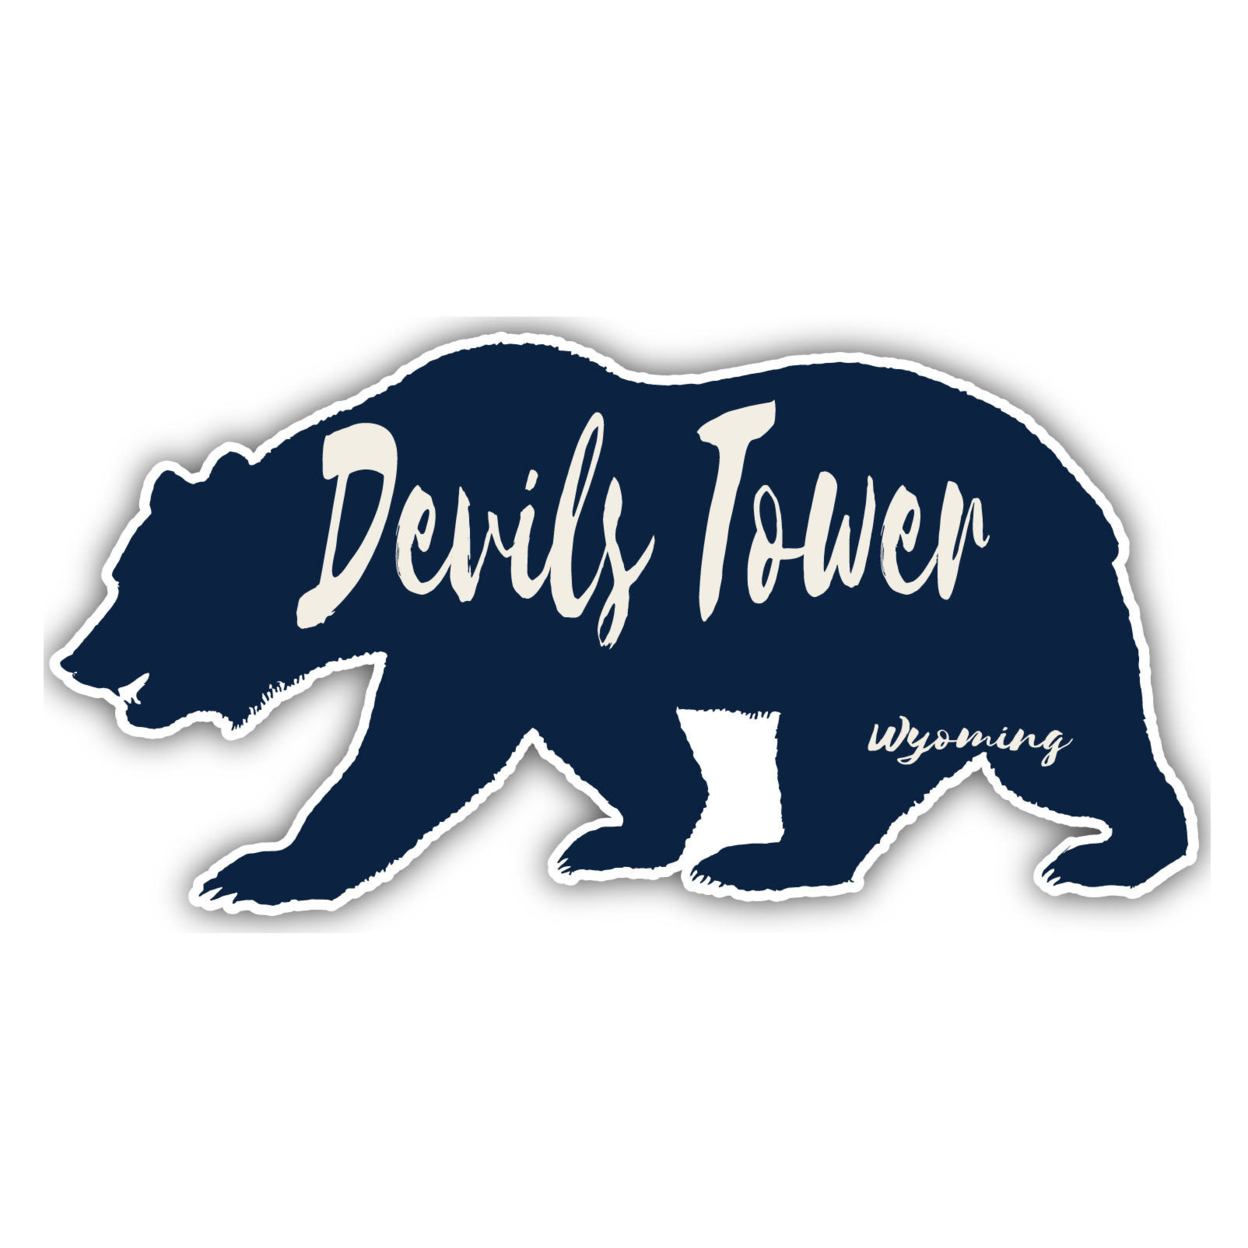 Devils Tower Wyoming Souvenir Decorative Stickers (Choose Theme And Size) - 4-Pack, 4-Inch, Tent